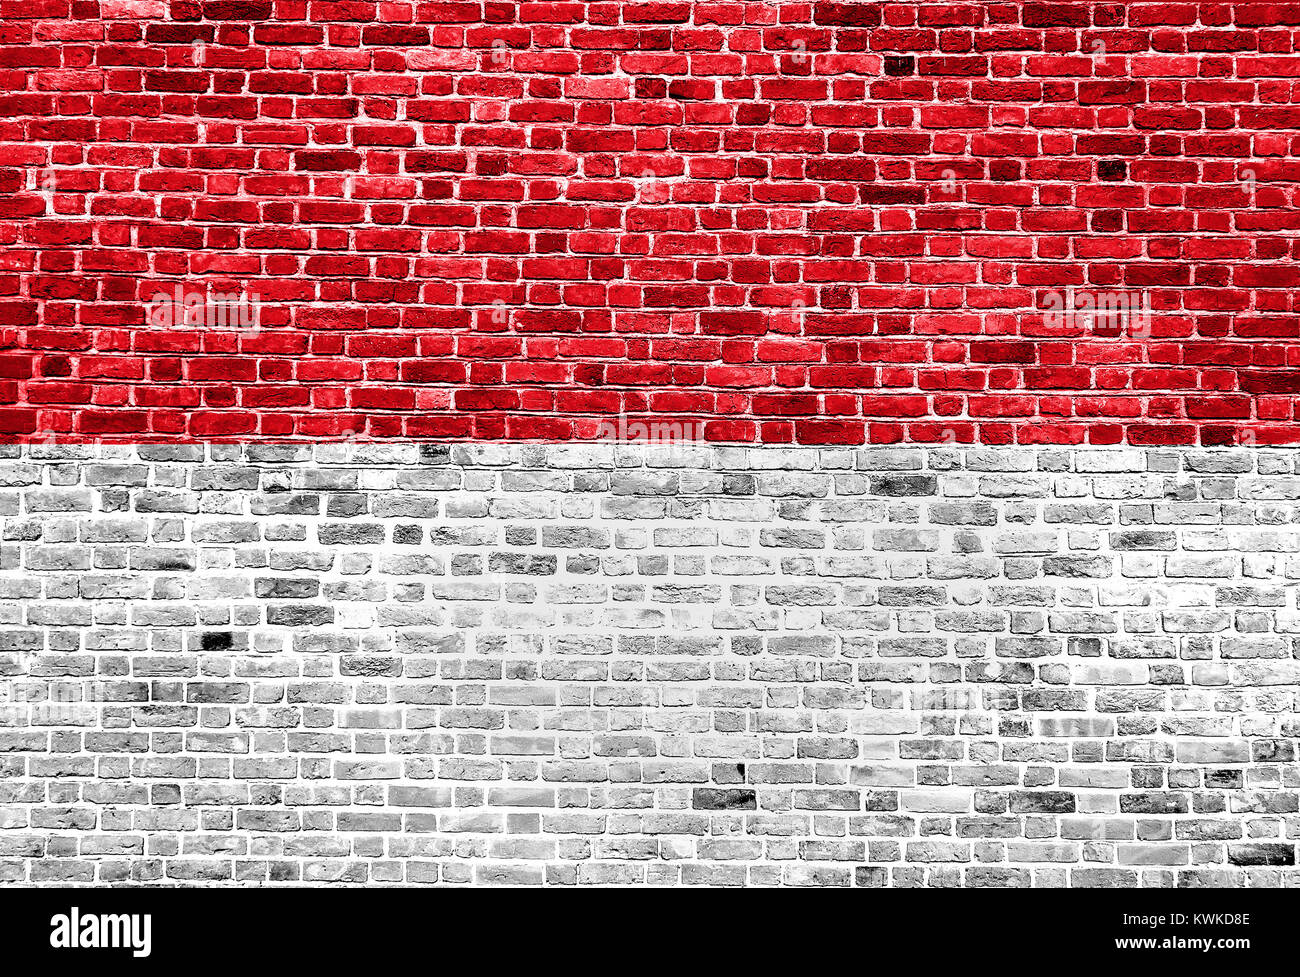 Flag Of Indonesia Painted On Brick Wall Background Texture Stock Photo Alamy